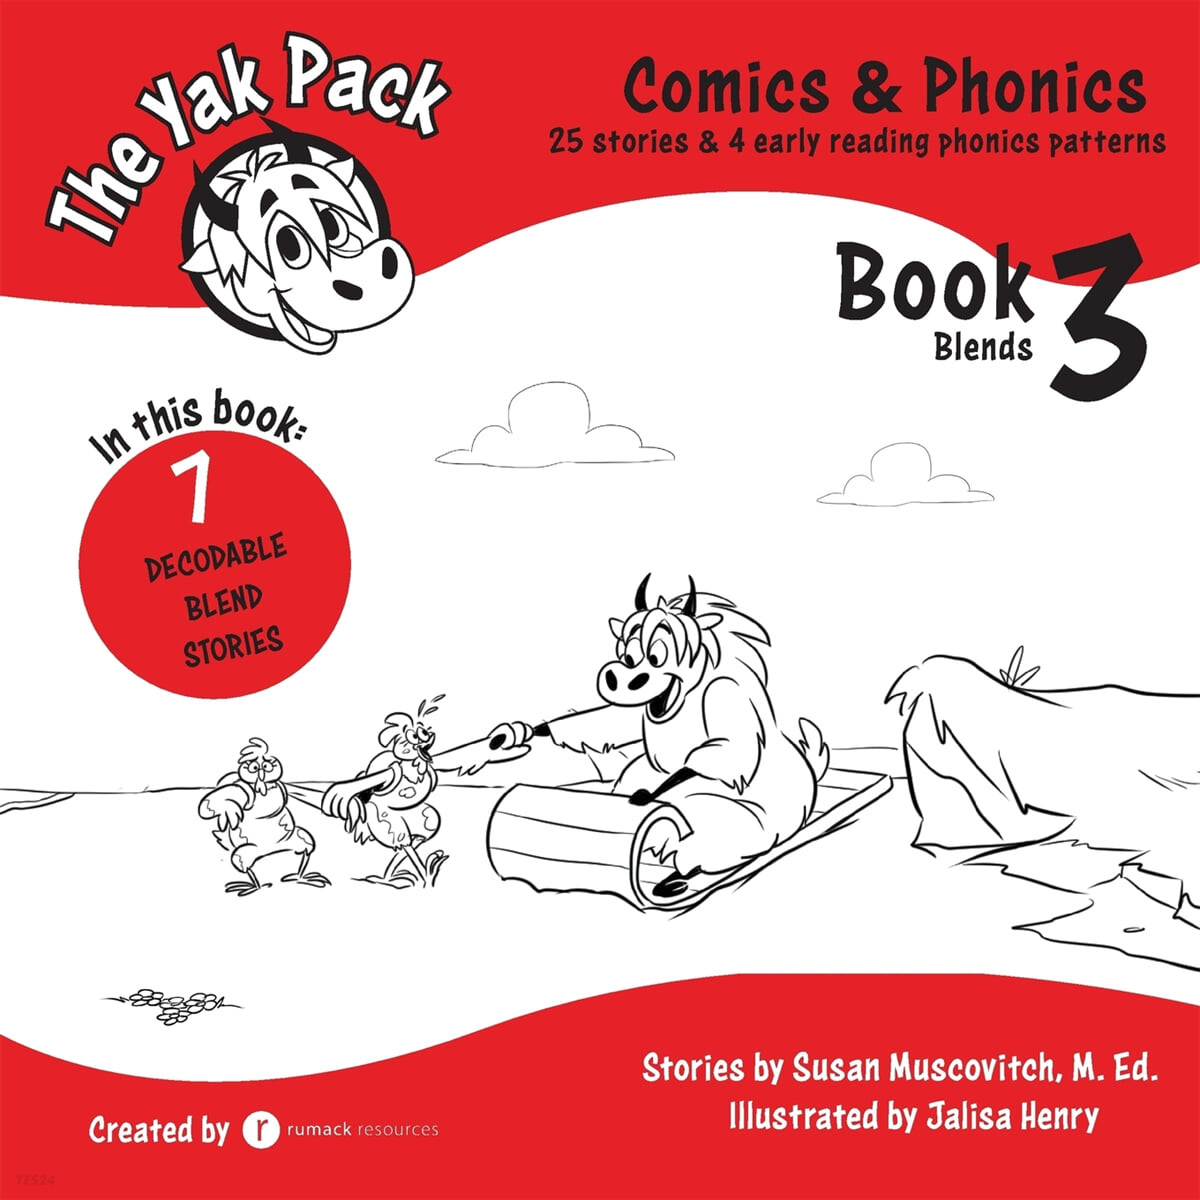 The Yak Pack (Comics & Phonics: Book 3: Learn to read decodable blend words)